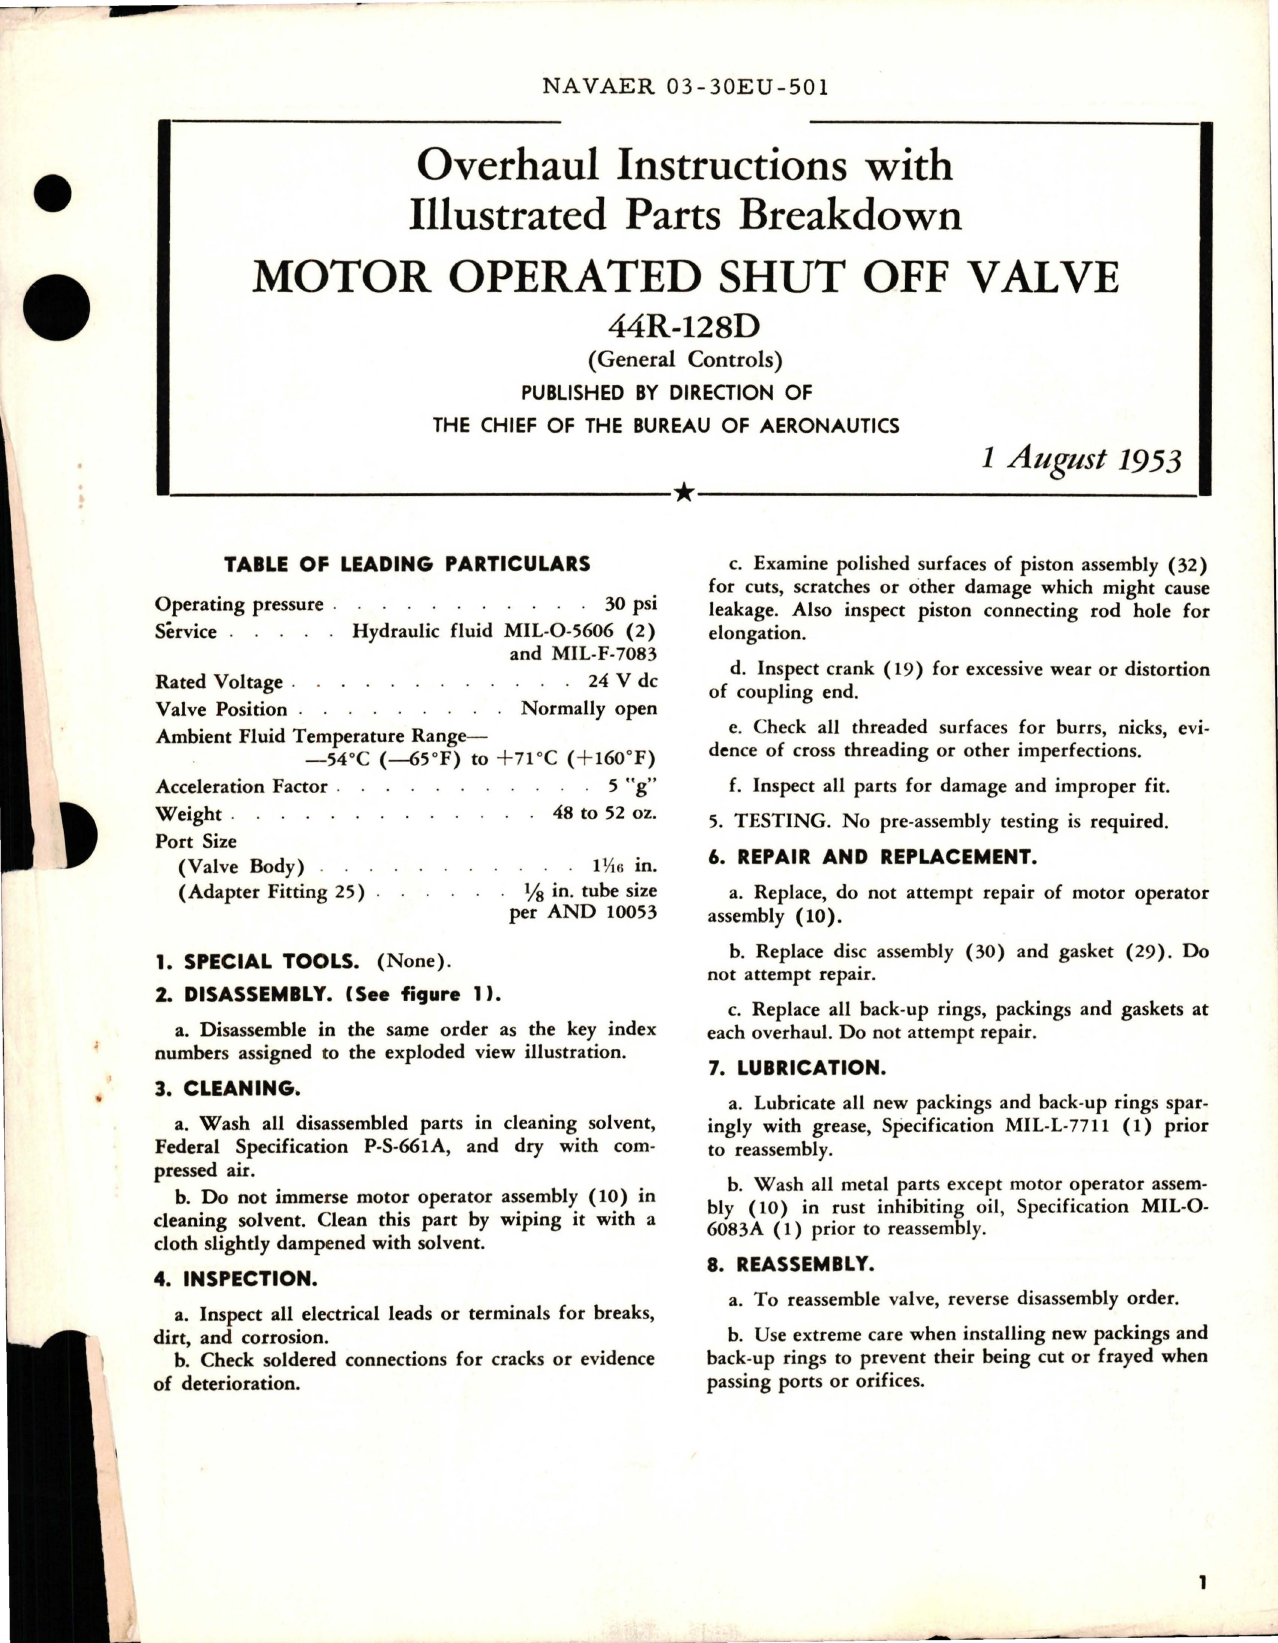 Sample page 1 from AirCorps Library document: Overhaul Instructions with Illustrated Parts Breakdown for Motor Operated Shut Off Valve - 44R-128D 